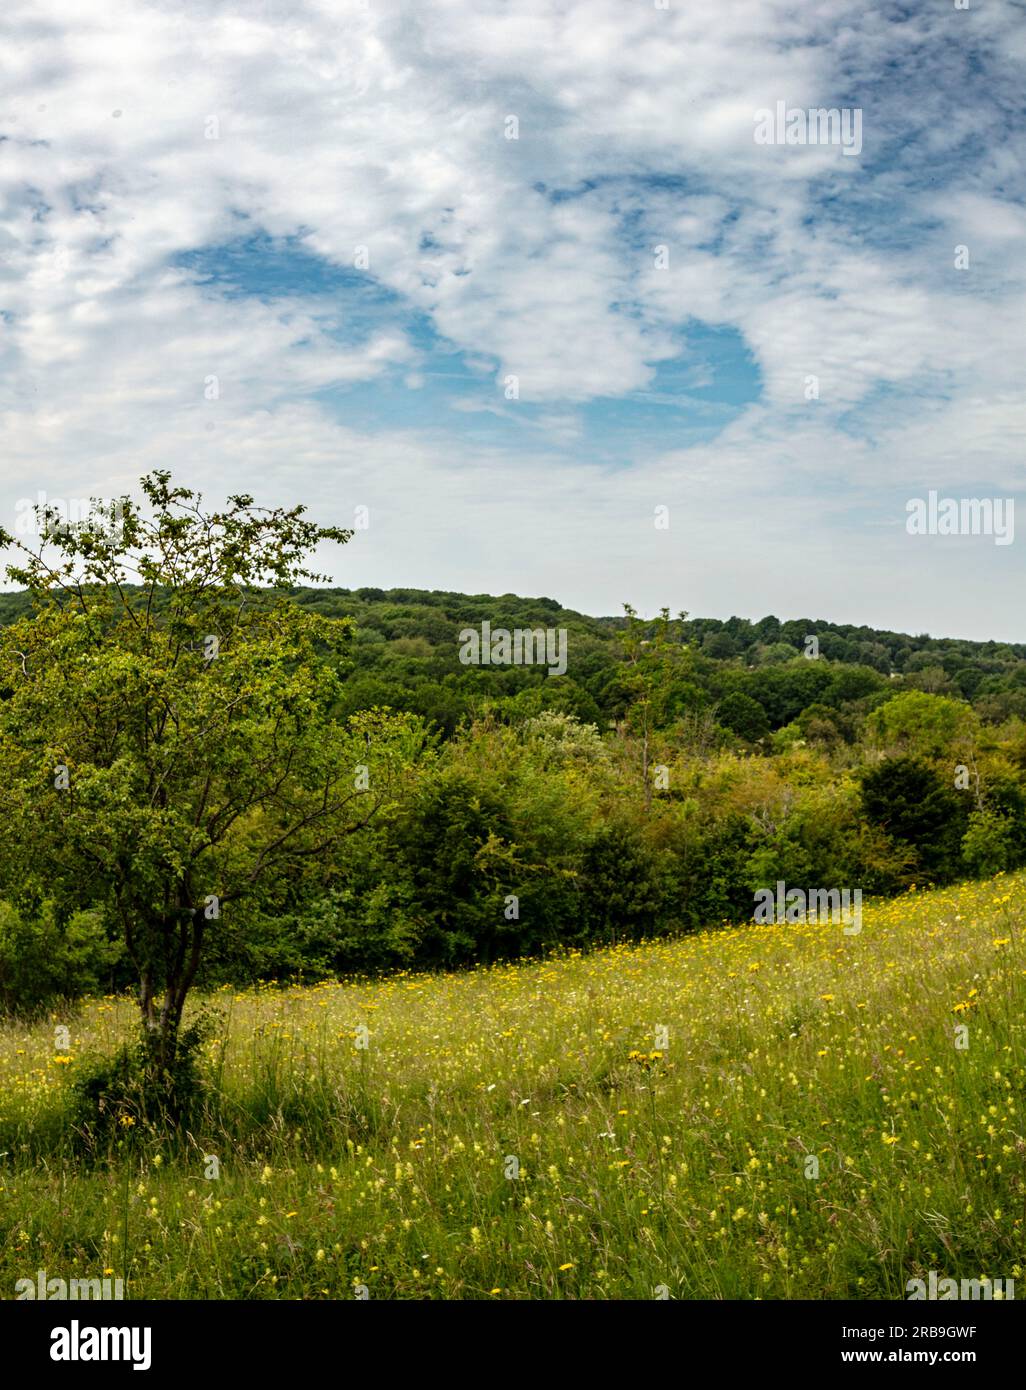 Environmentally important open space landscape in the Surrey Hills Area of Outstanding Natural Beauty, around South London, England, Europe Stock Photo